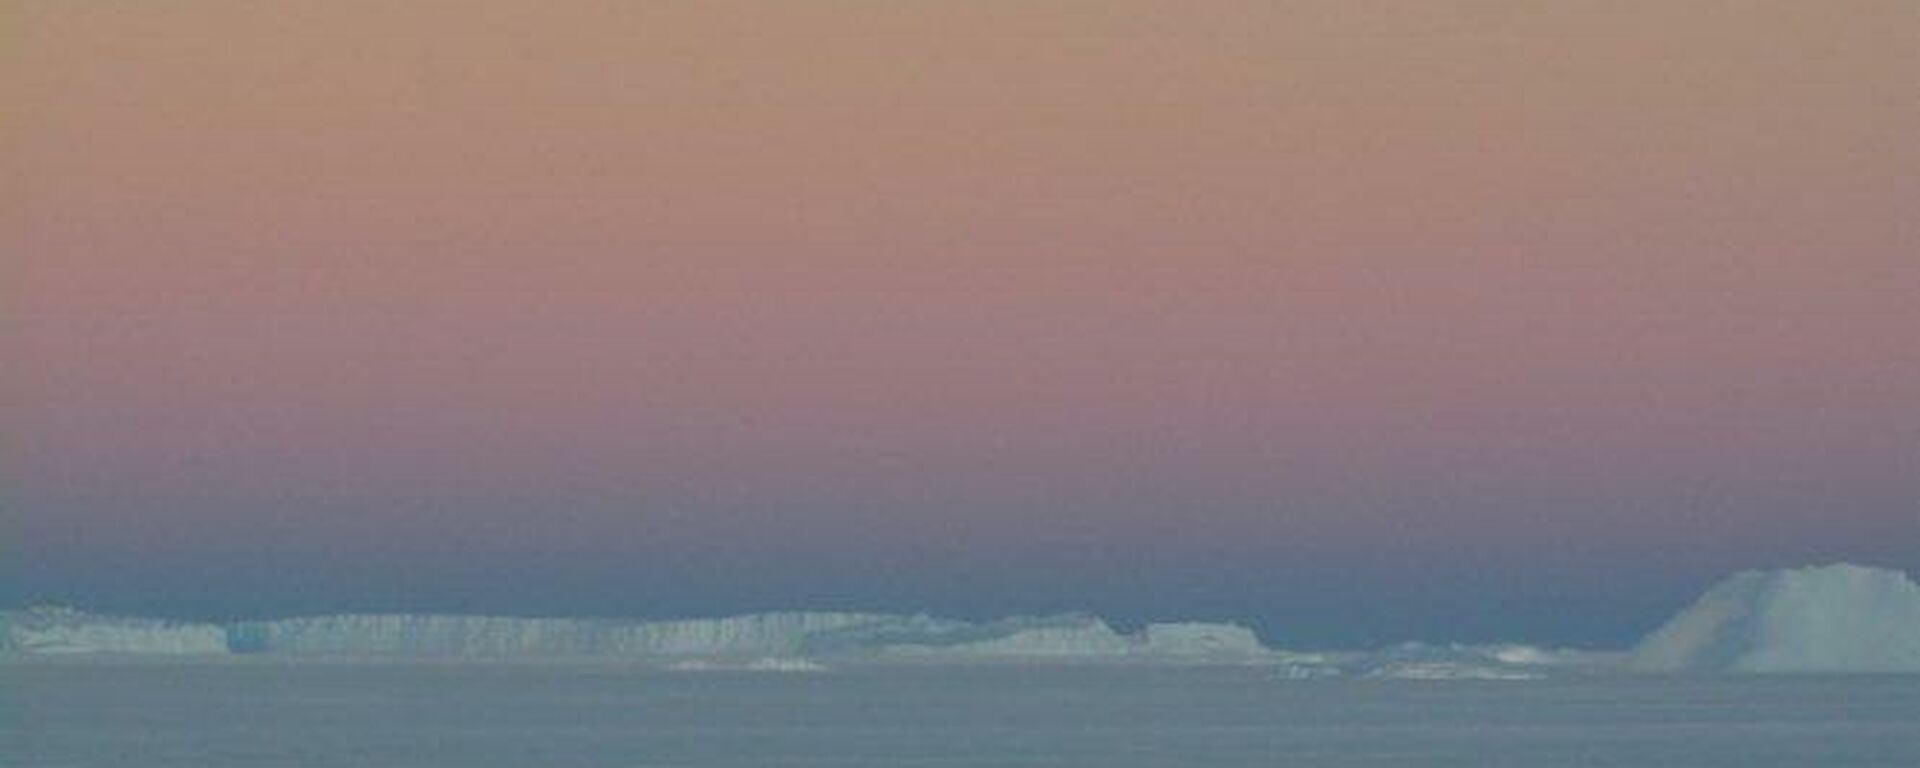 Adélie penguins at Macey hut with a typical pink and blue sky